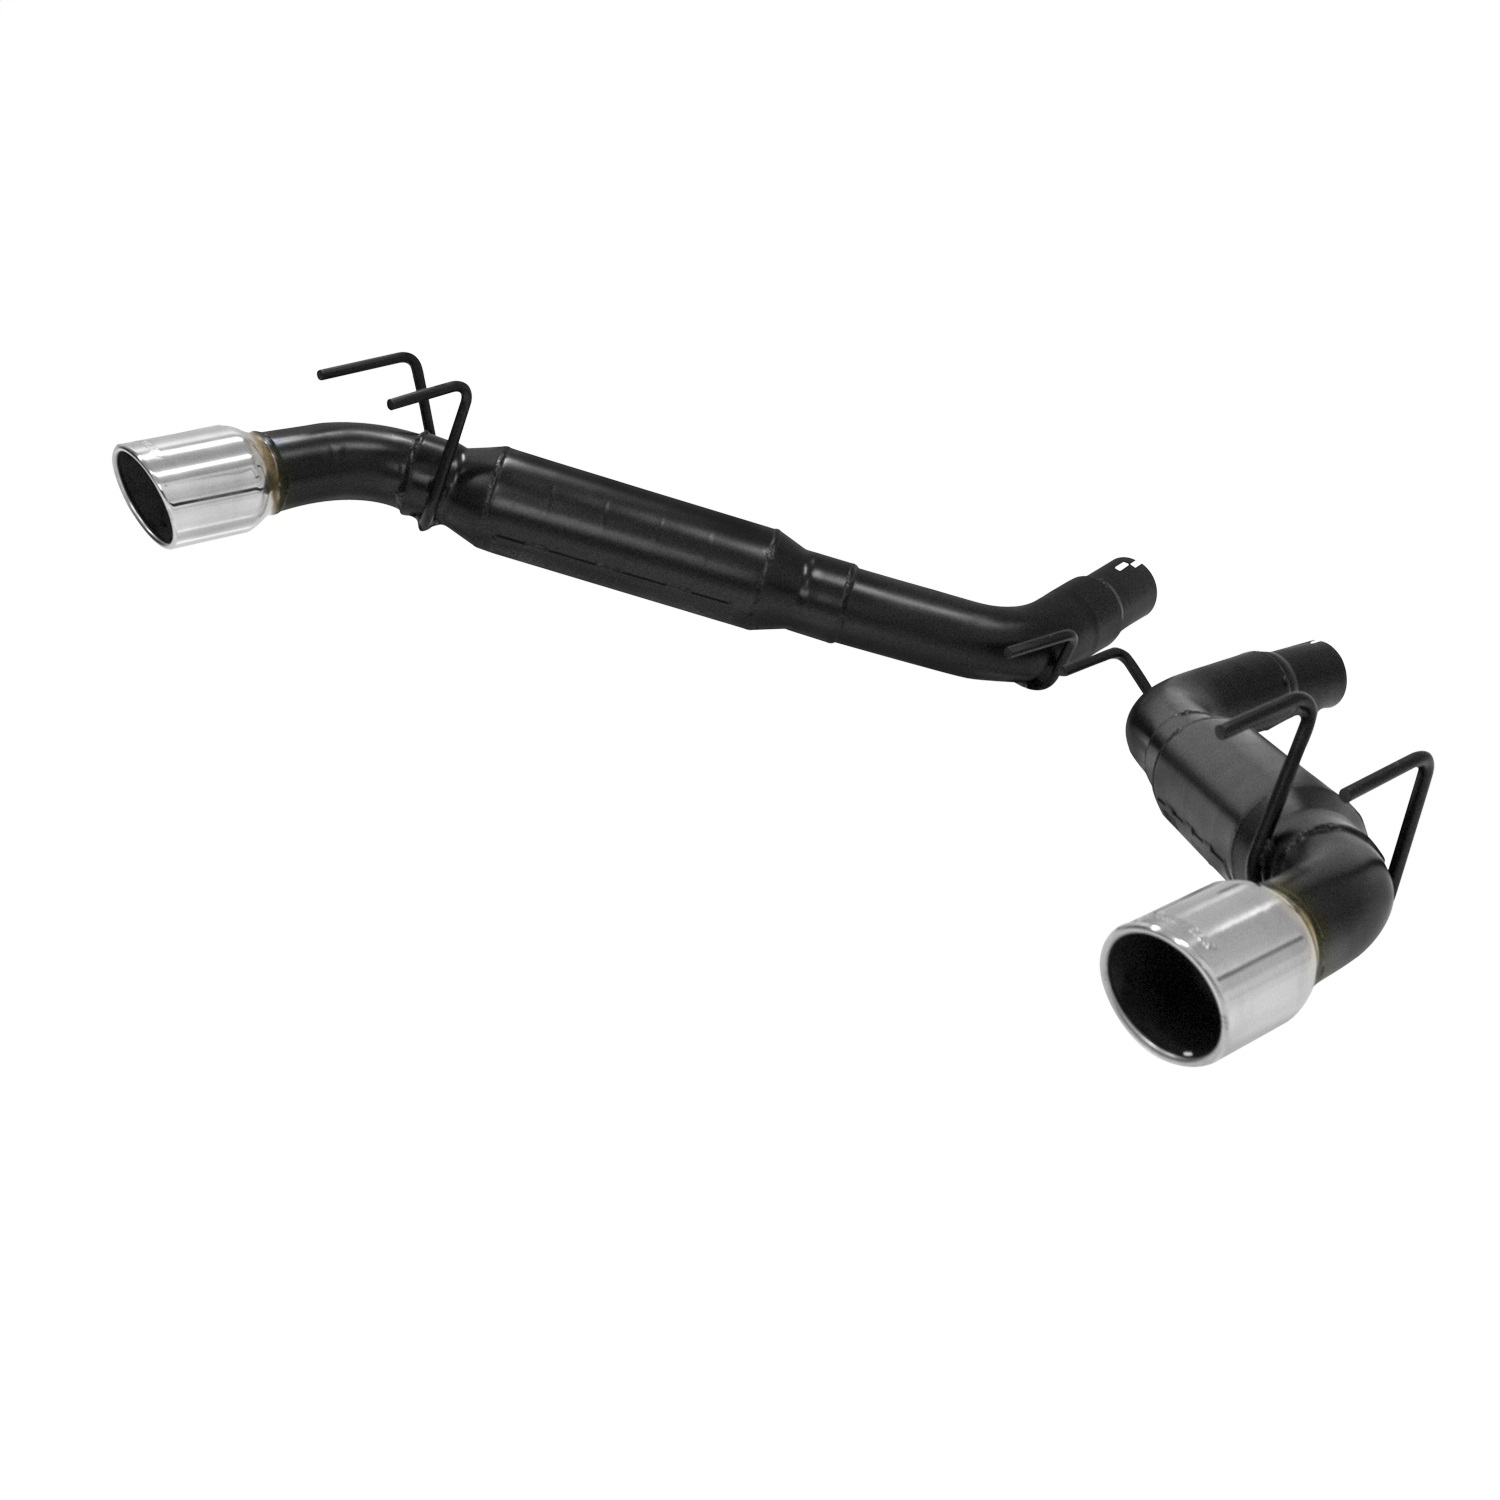 Flowmaster Flowmaster 817504 Outlaw Series Axle Back Exhaust System Fits 10-13 Camaro